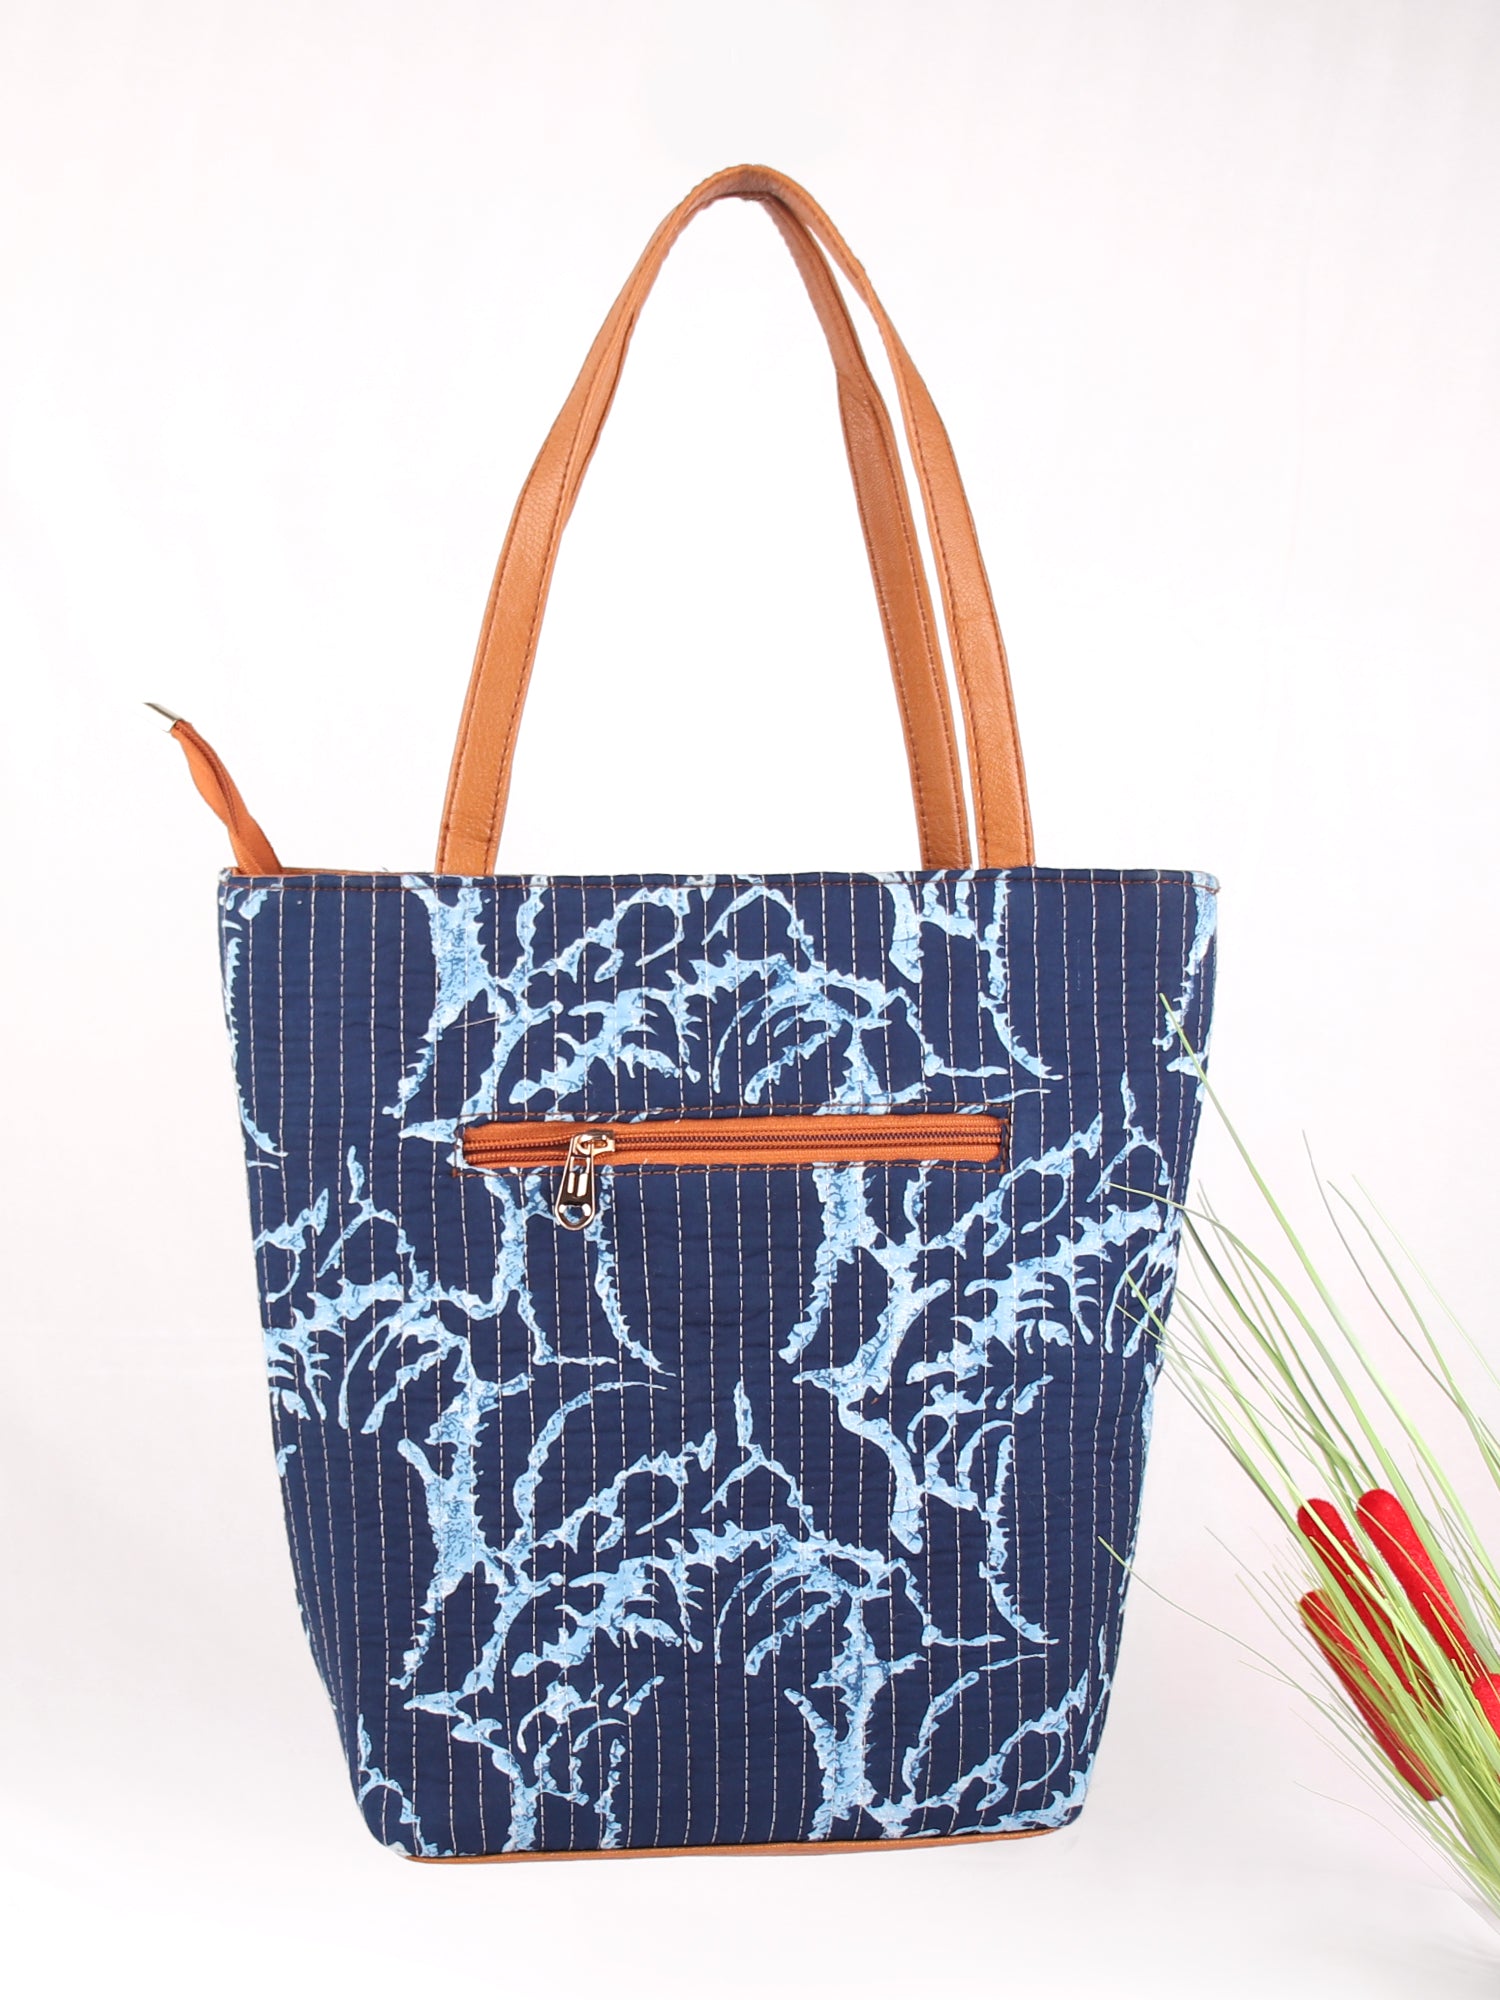 ABSTRACT FLOWERS TOTE BAG